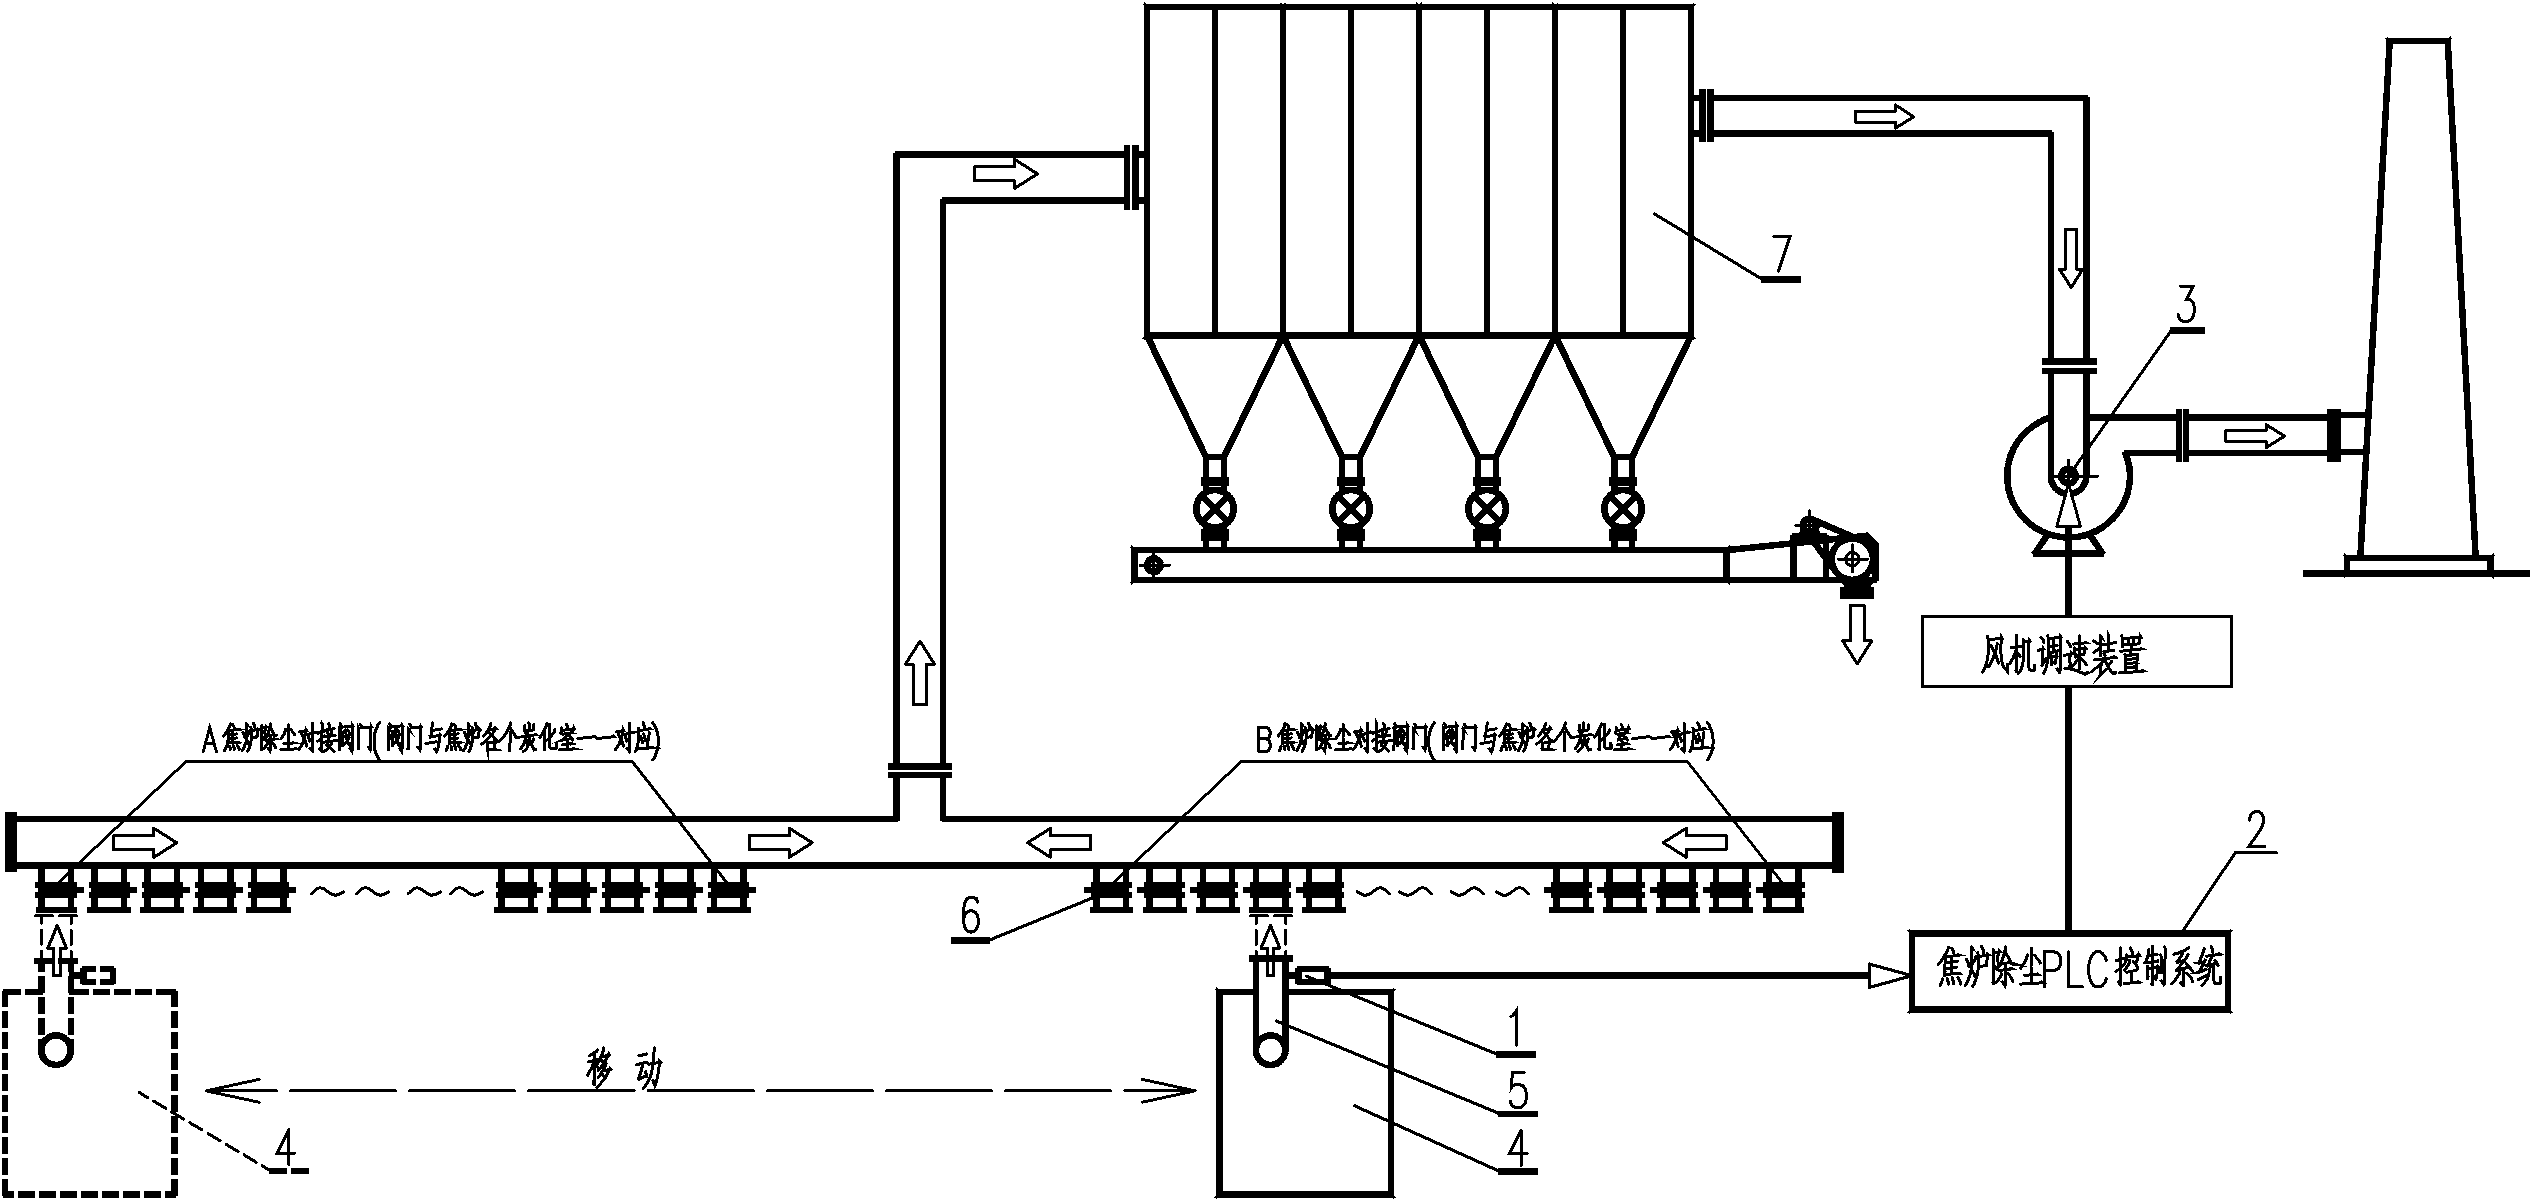 Energy-saving control method and device of dust removal blower of coke oven